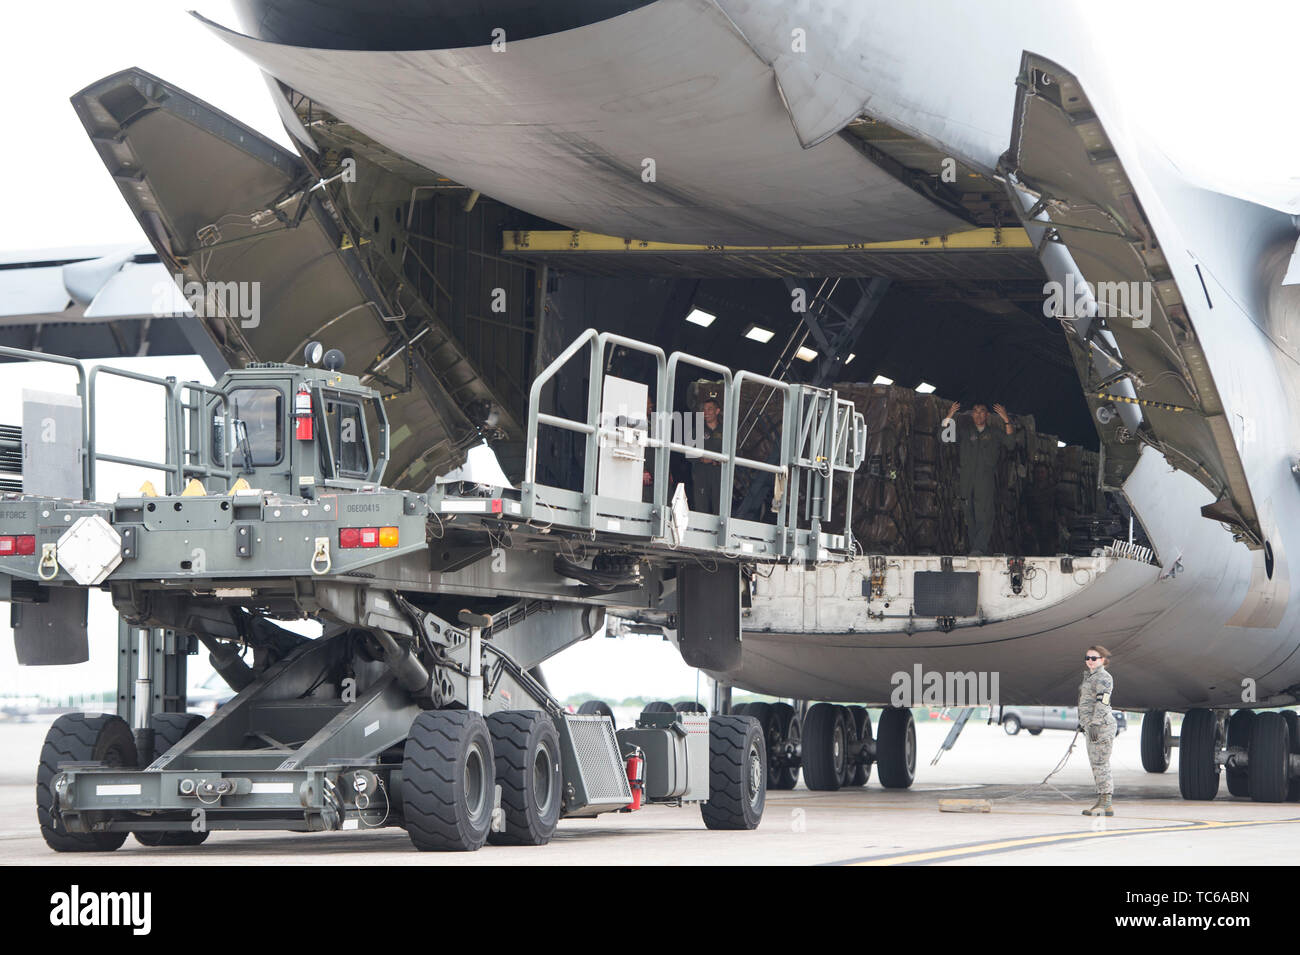 A loadmaster from the 312th Airlift Squadron guides a 60K Loader to the C-5 Galaxy in St. Paul, Minn., May 22, 2019. The Airmen are taking part in the Denton Program which is a Department of Defense transportation program that moves humanitarian cargo, donated by the U.S. based Non-Governmental Organizations to developing nations to ease human suffering.   (U.S. Air National Guard photo by Amy M. Lovgren) Stock Photo